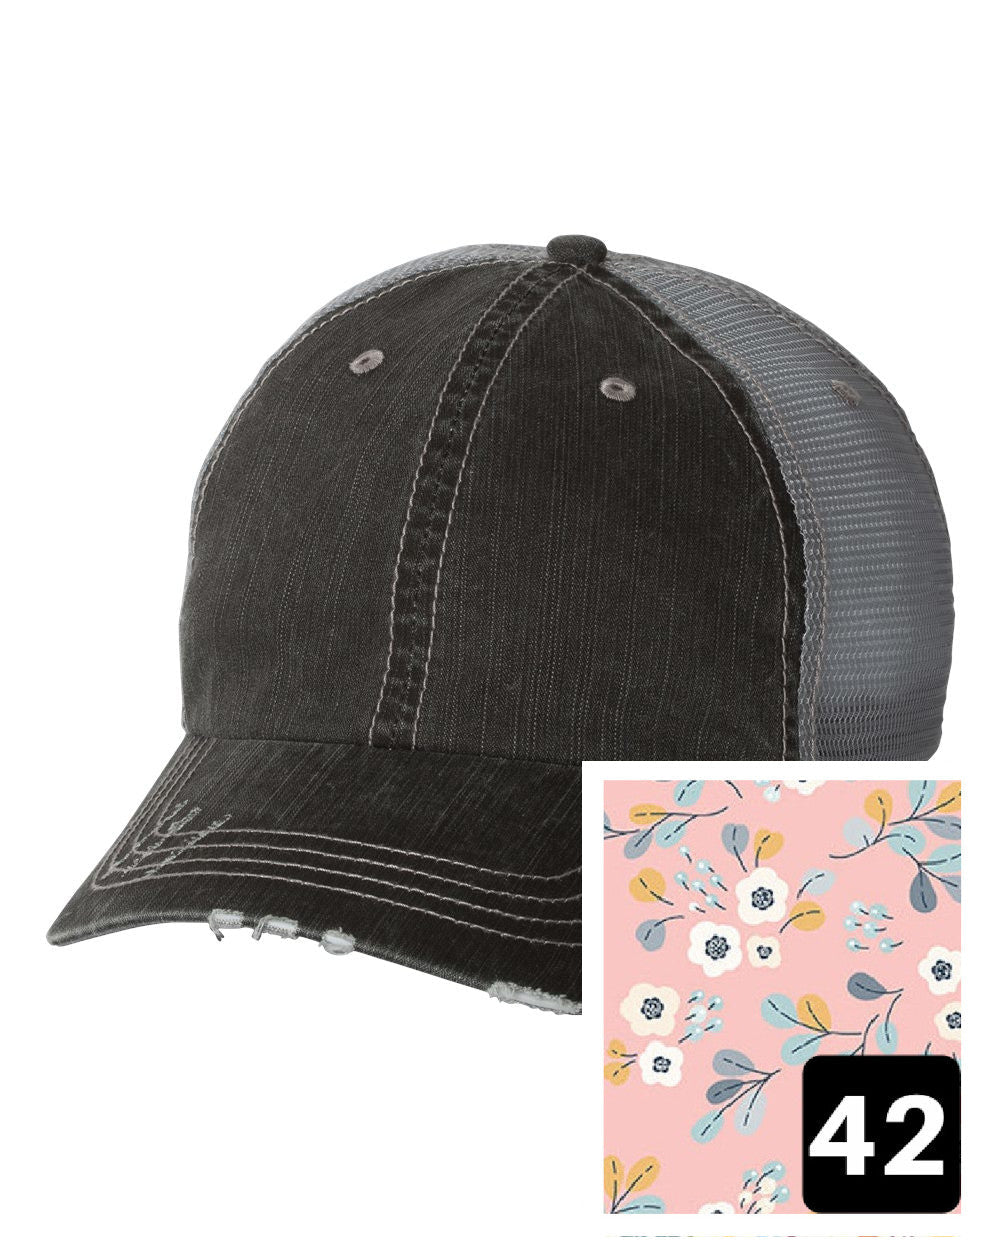 gray distressed trucker hat with light blue and pink mosaic fabric state of Nebraska